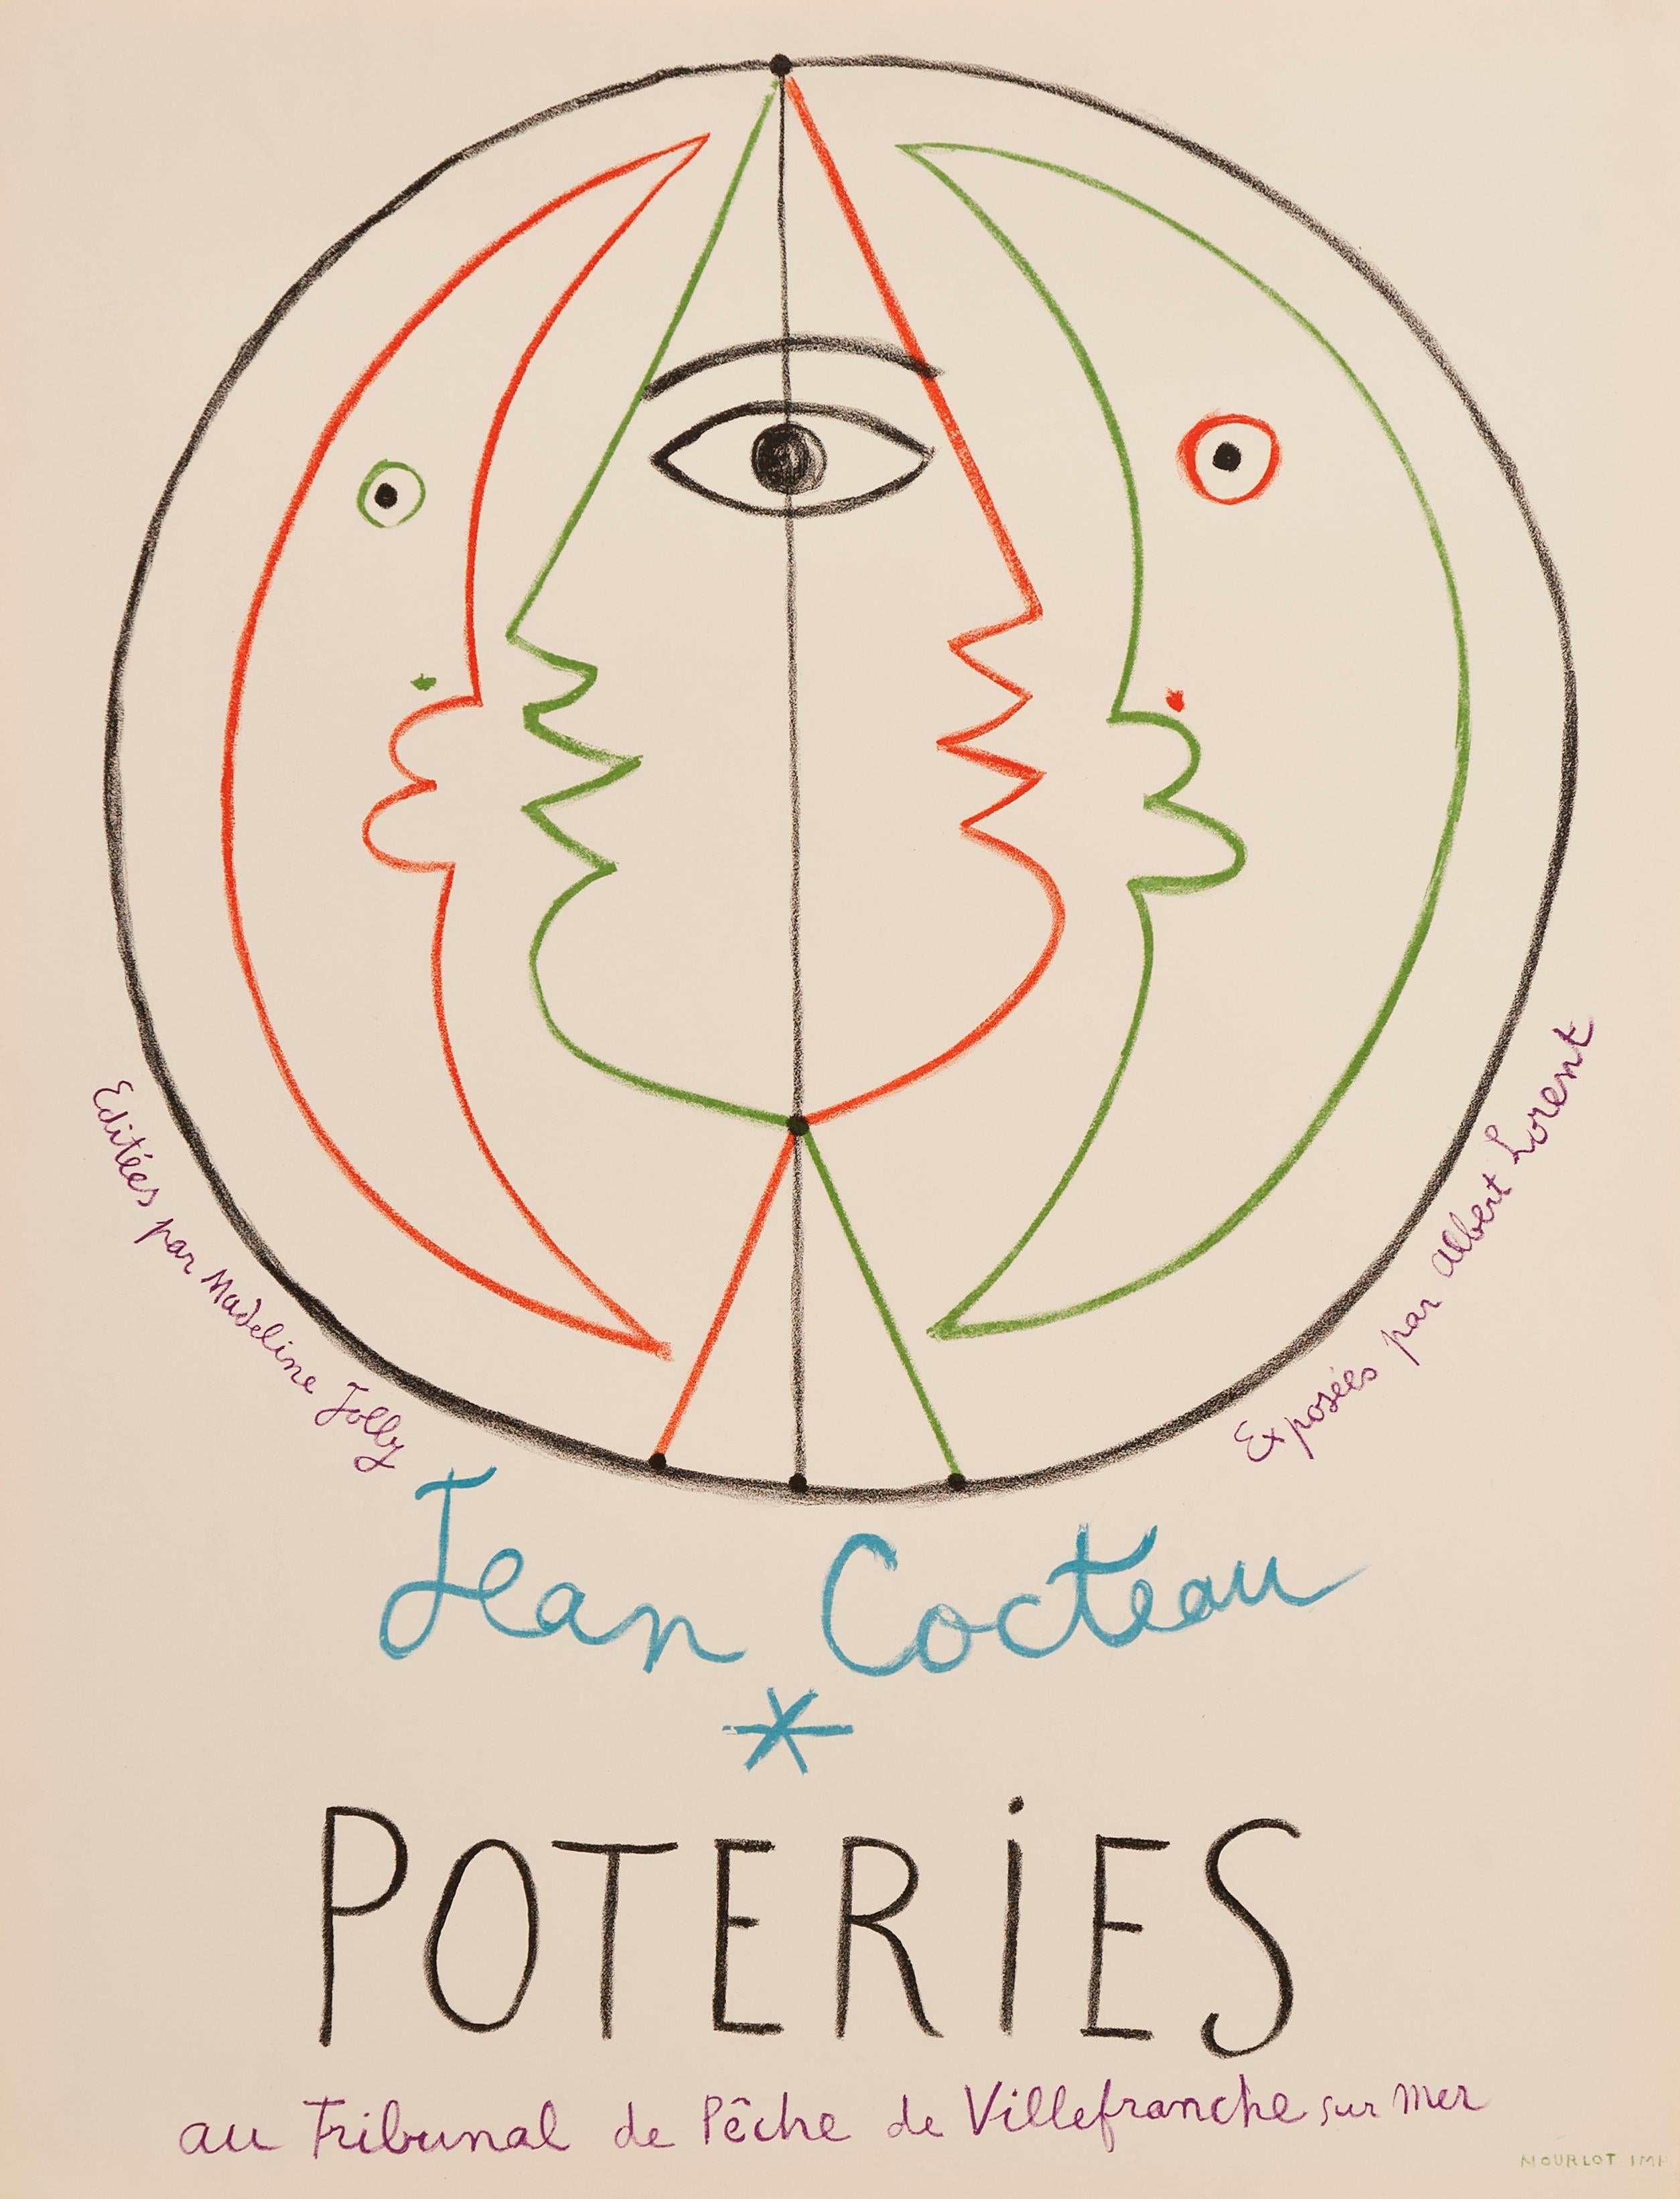 Classic Poster Paper - Perfect Condition A+

This original vintage poster was designed by Jean Cocteau for a Pottery exhibition at the Tribunal de Peche de Villefranche-sur-Mer, France. During his career, Cocteau made more than three hundred ceramic